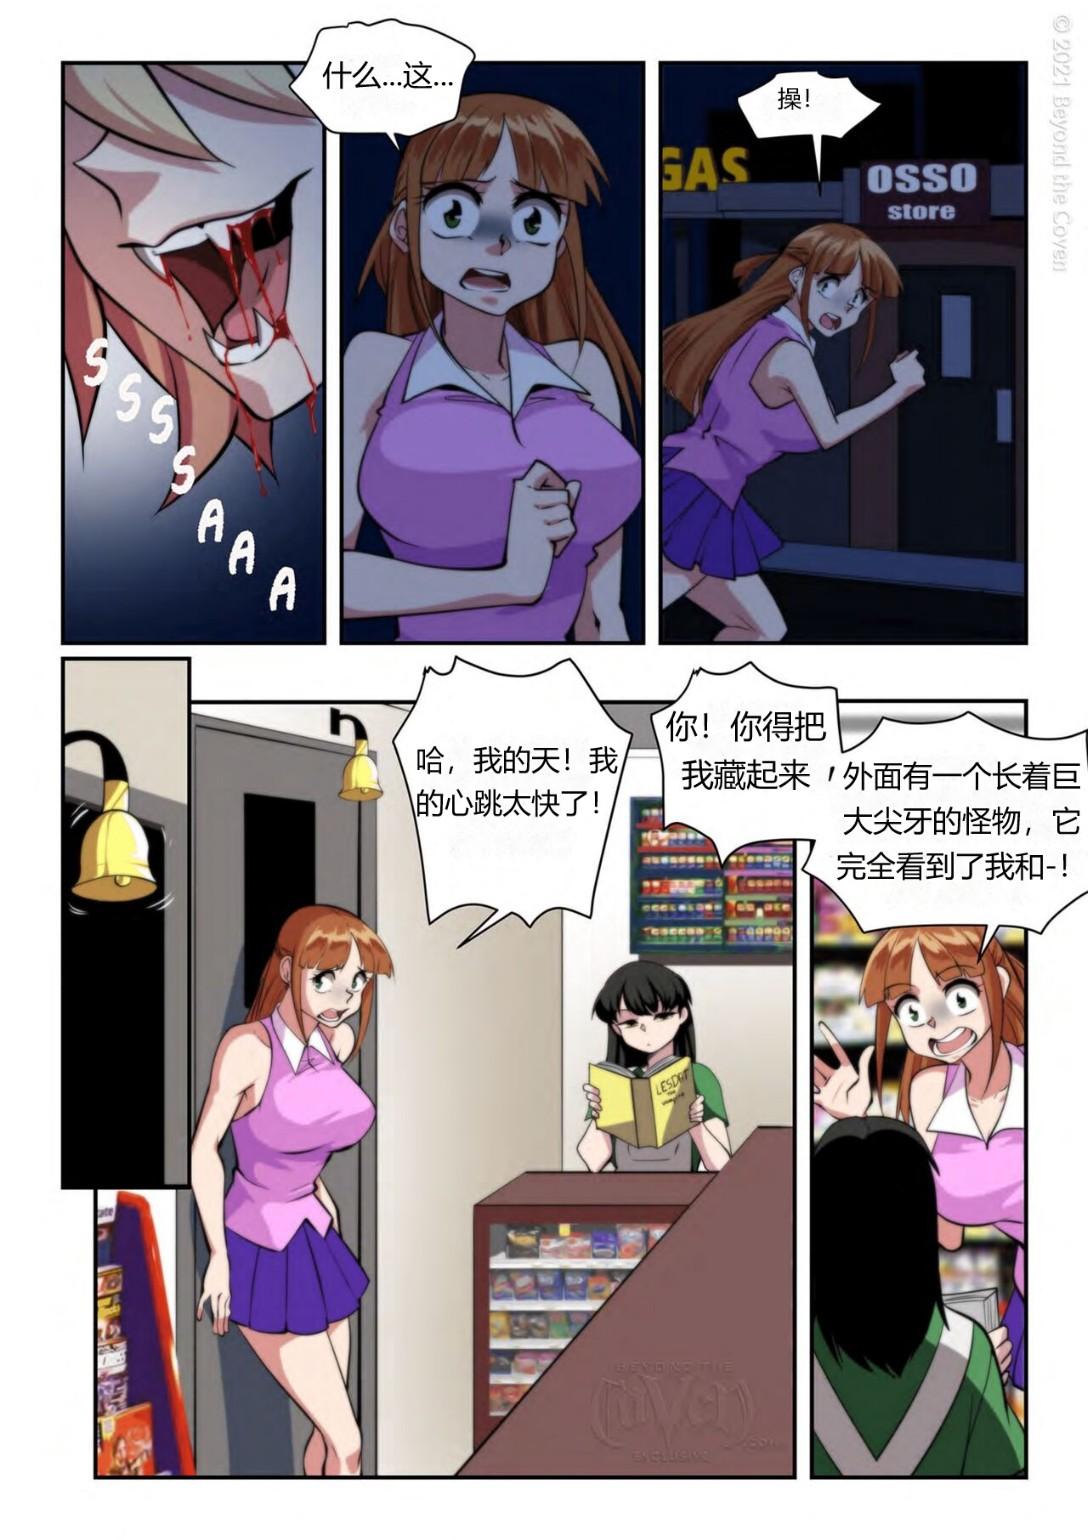 She Love Bites Teen Sex - Page 4